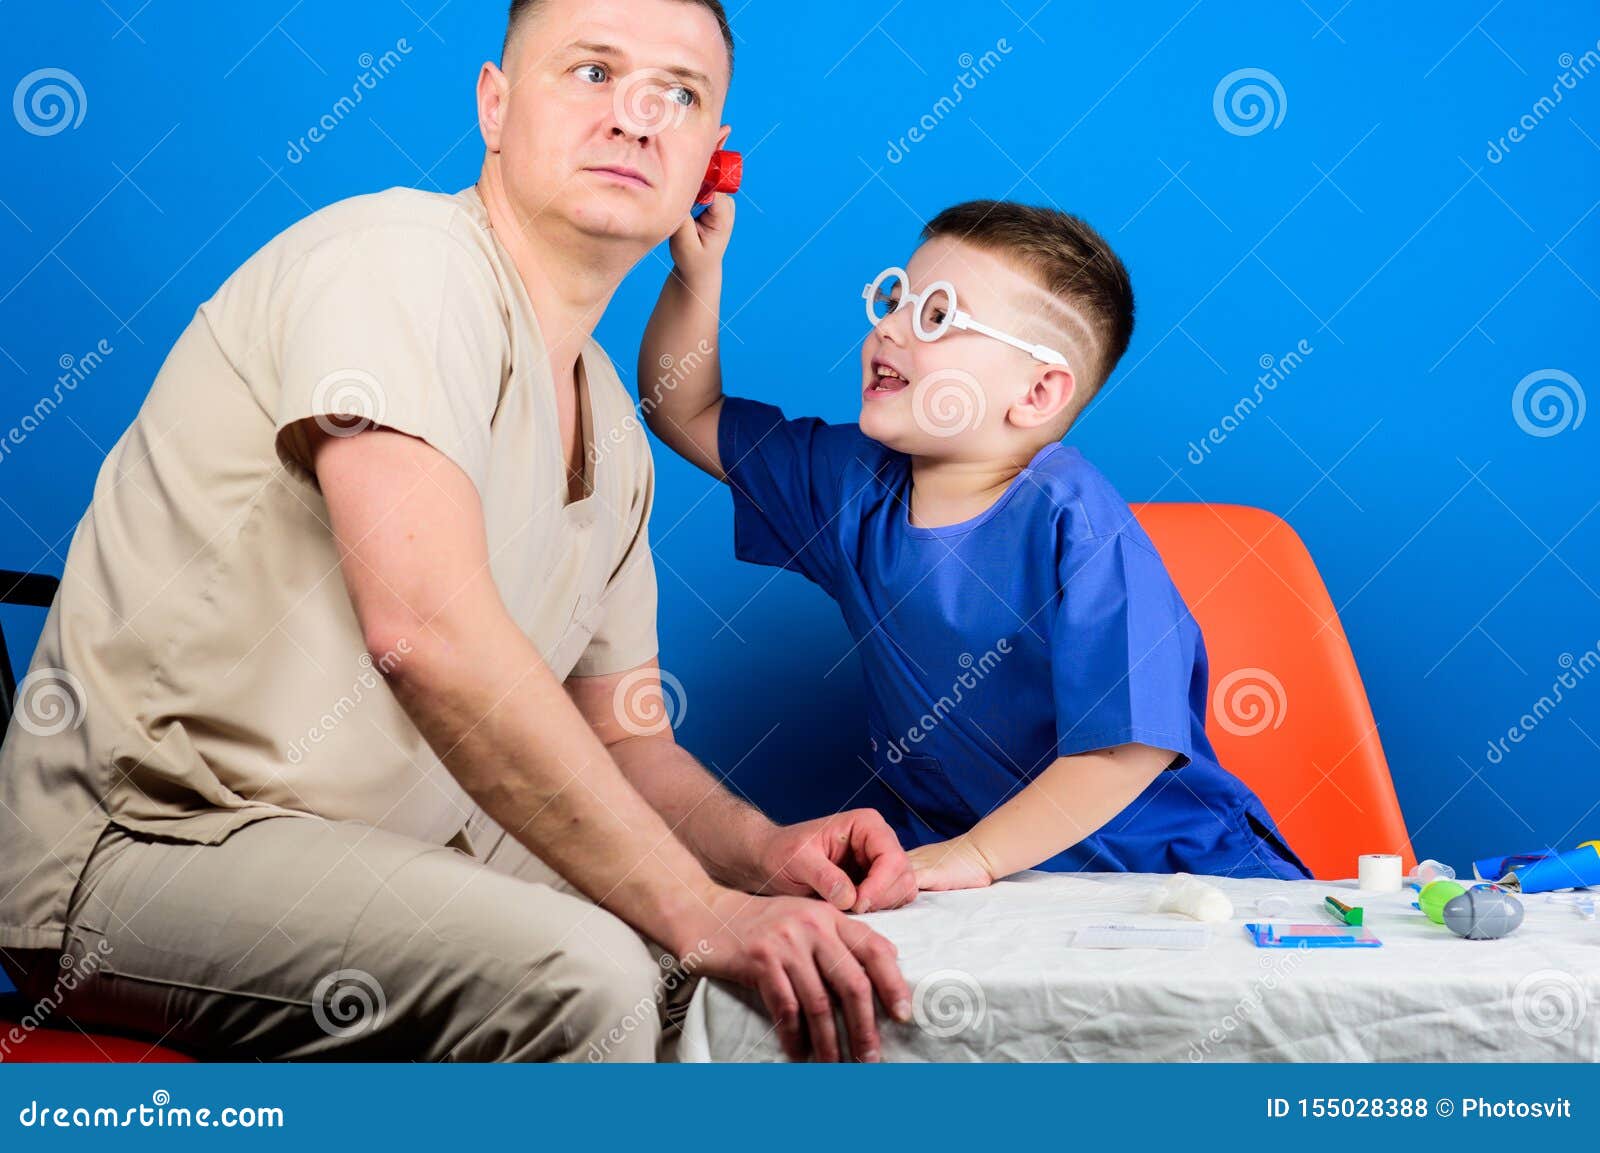 Small boy with dad in hospital. happy child with father with stethoscope. family doctor. medicine and health. father and son in medical uniform. small boy play with father. small boy doctor.